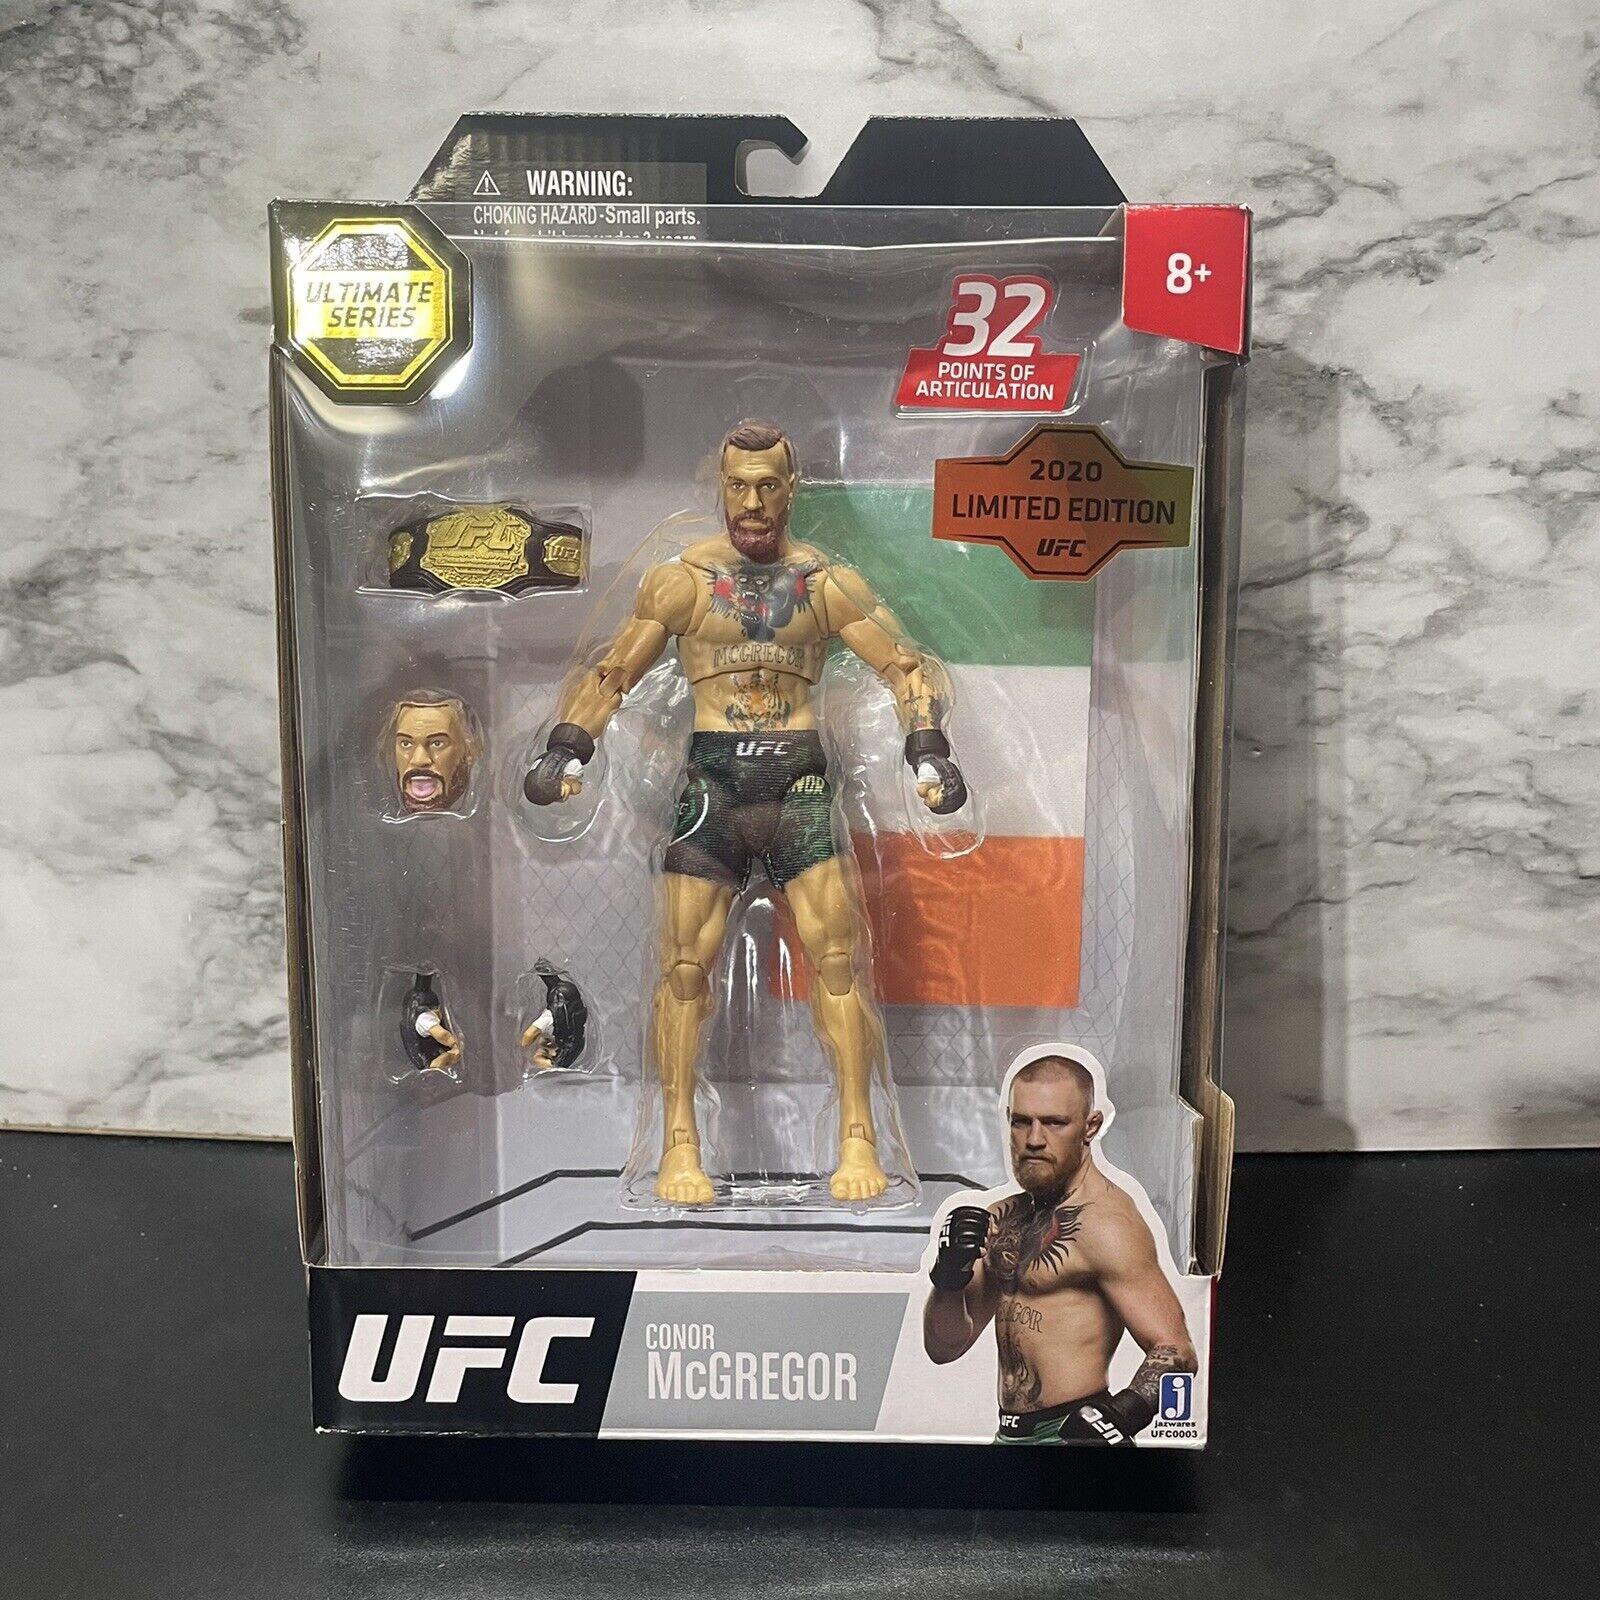 UFC Connor McGregor 6" LIMITED EDITION Ultimate Series Action Figure NEW